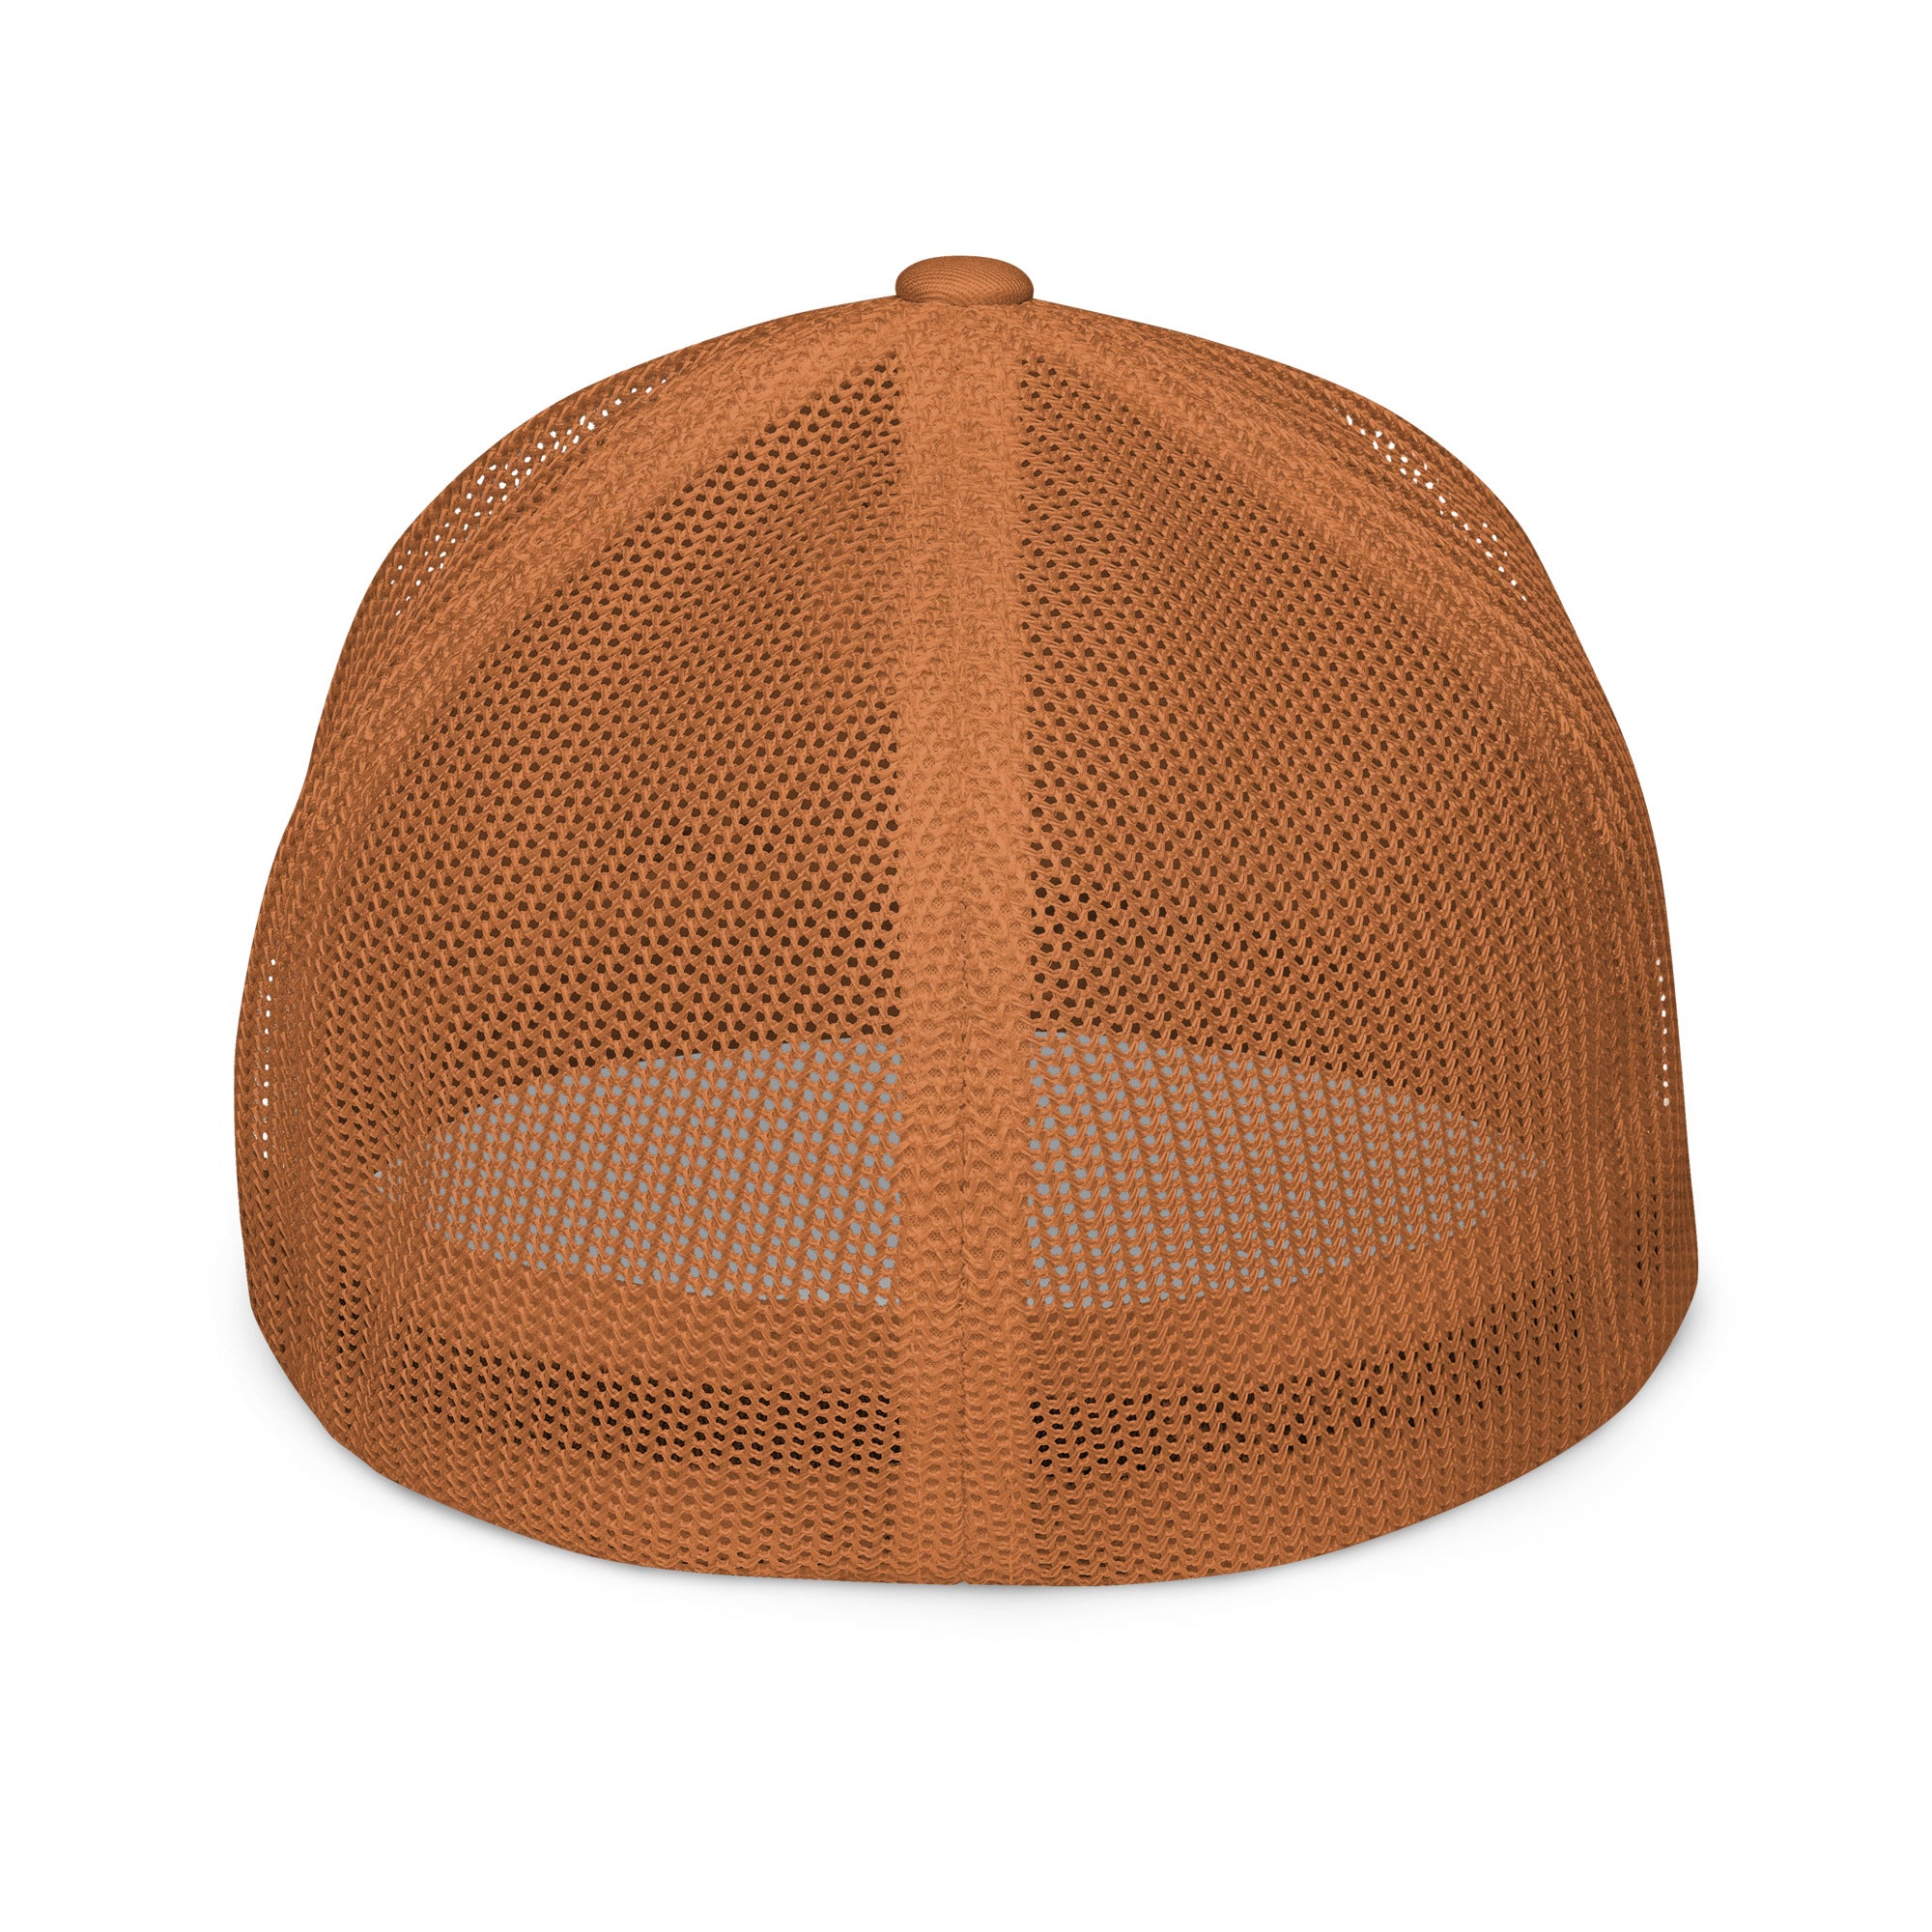 OOHdaLAA "Elegance Enigma" Luxury Brown Trucker Hat  Title: Elevate Your Style with the OOHdaLAA New York Embroidered Brown Trucker Hat - A Fusion of Luxury and Urban Chic